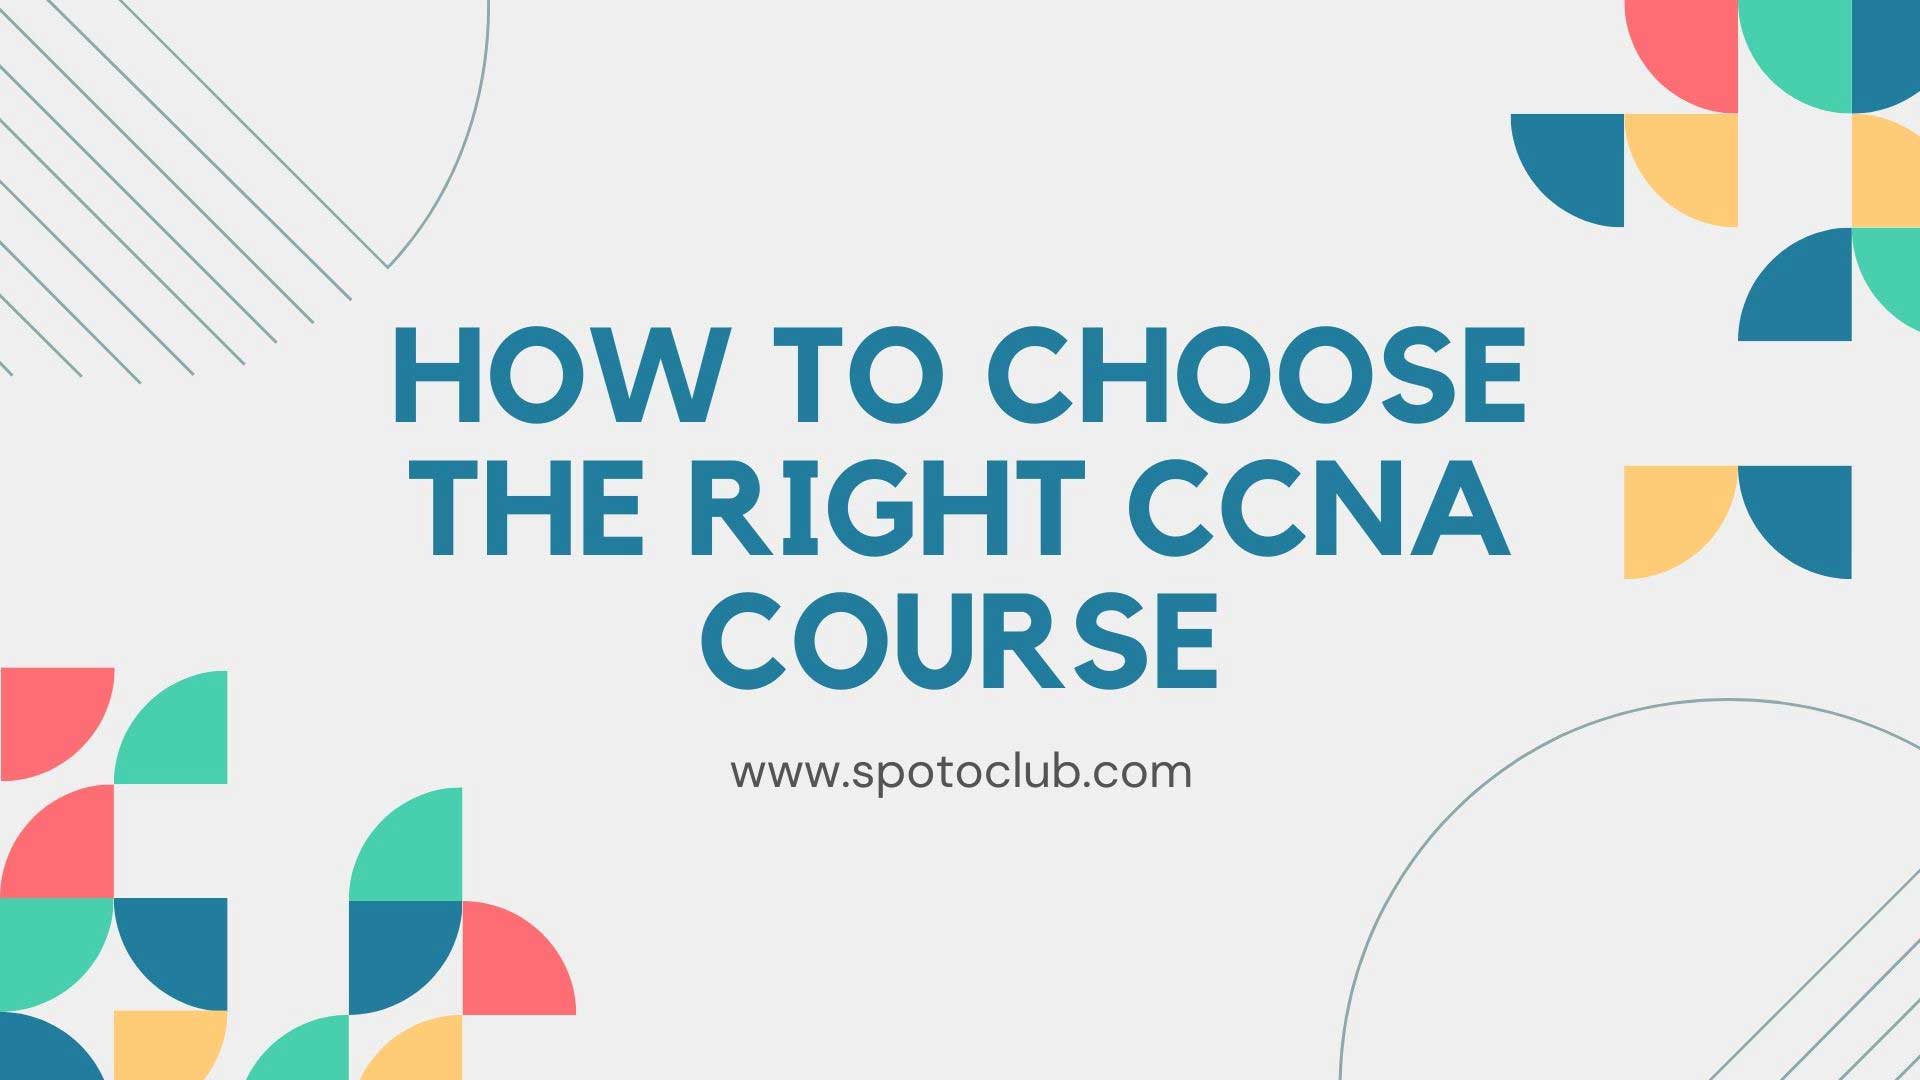 How to choose the right CCNA course